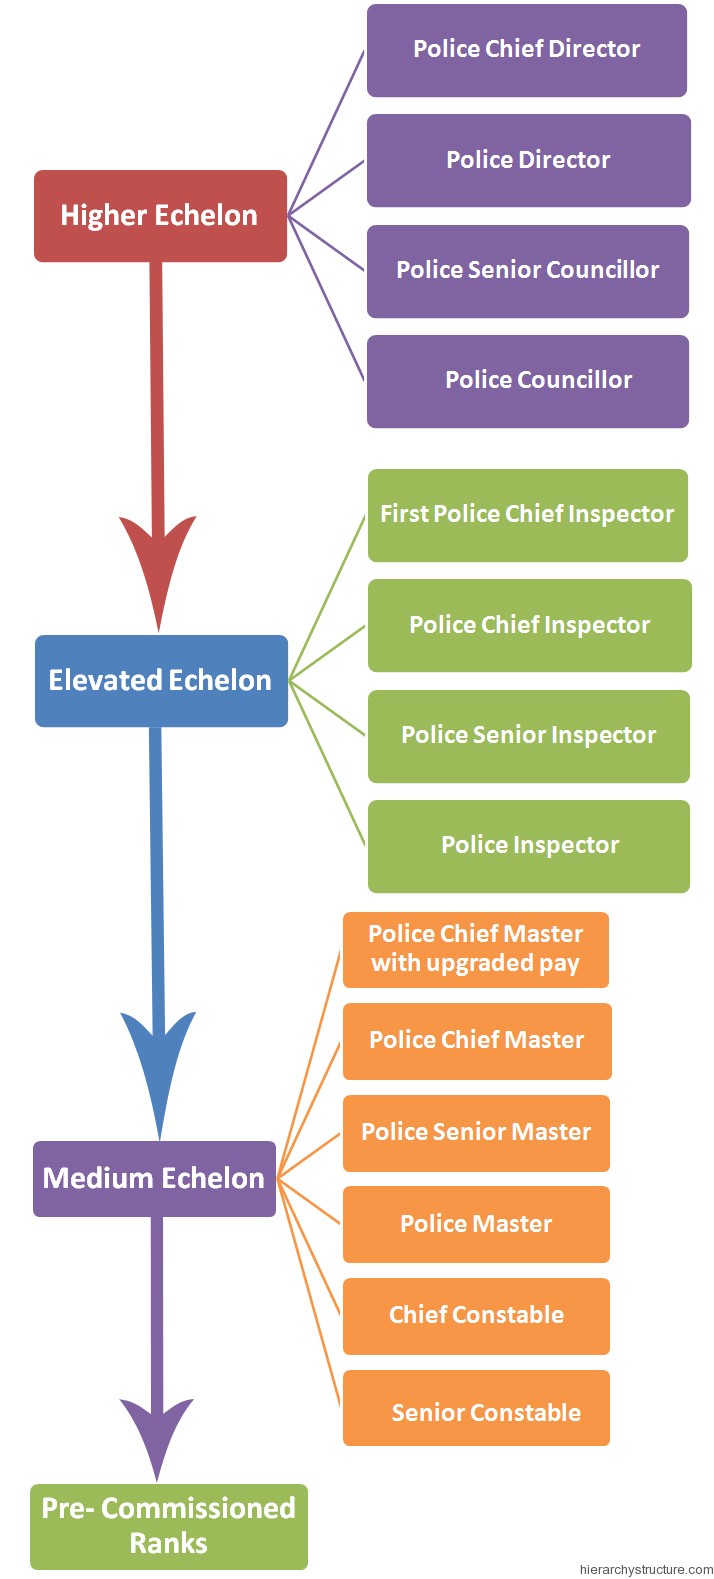 Police Hierarchy in Germany